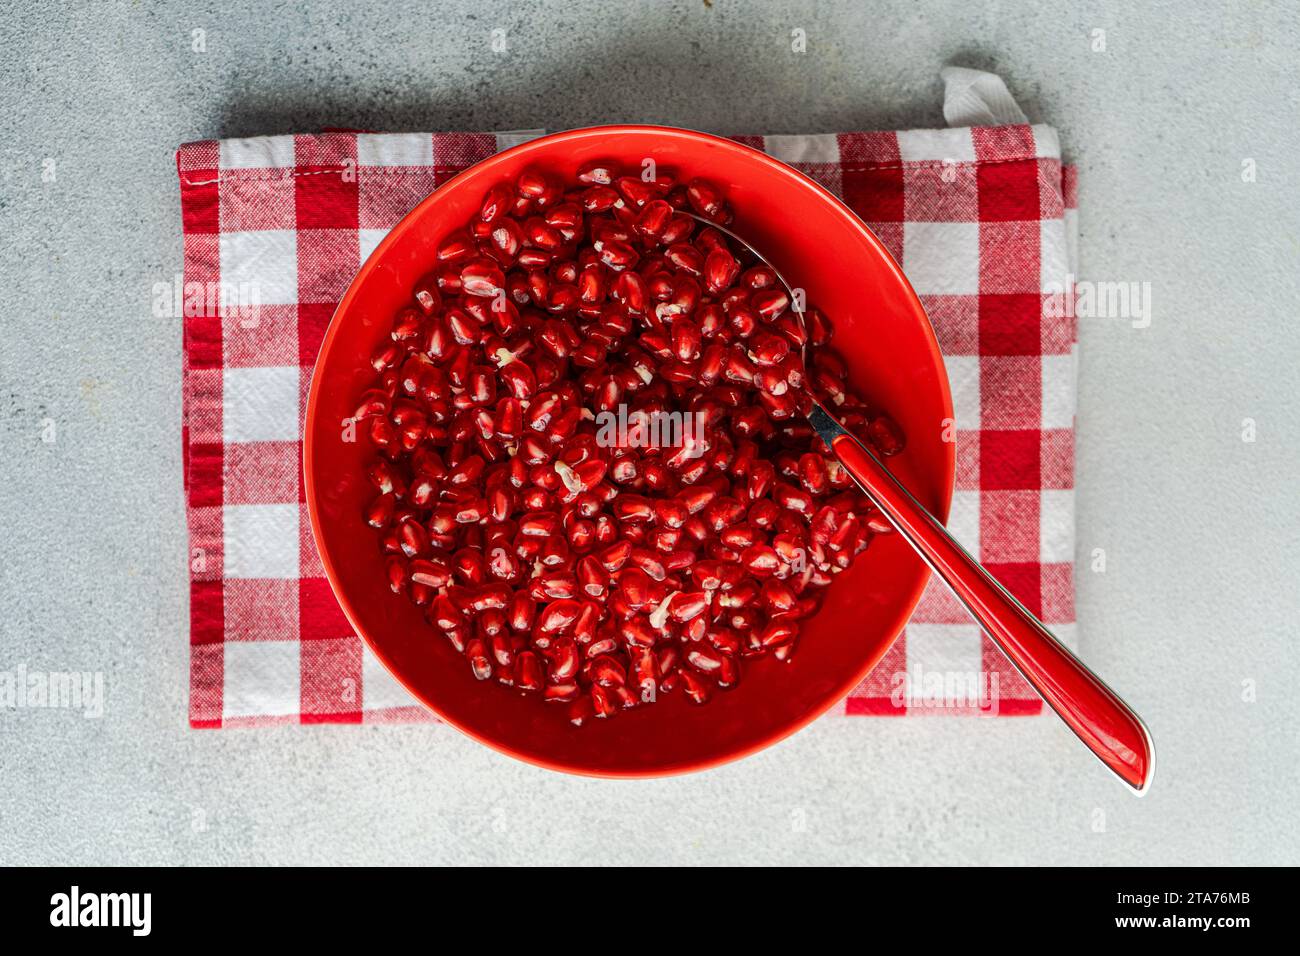 Overhead view of a bowl of Ripe pomegranate seeds on a red folded checked napkin Stock Photo